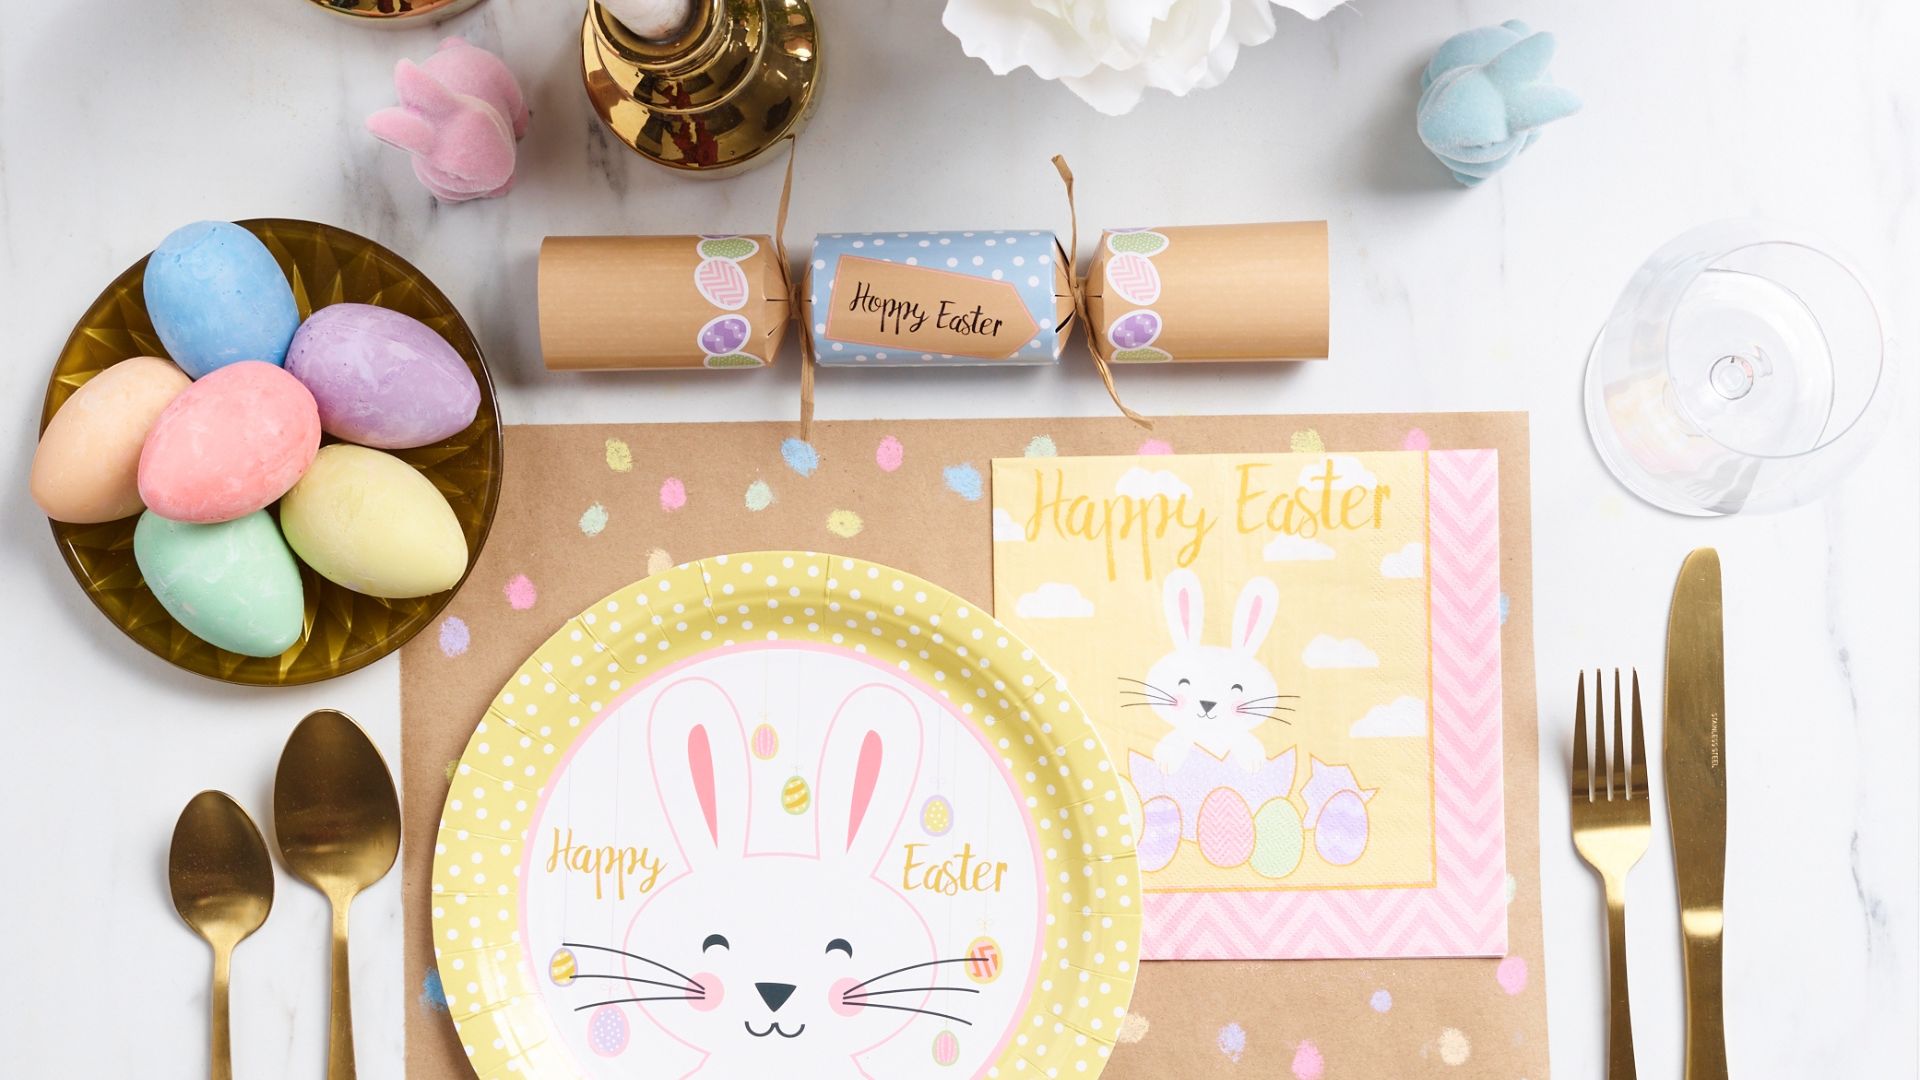 Happy Easter printed paper plates, napkin, paper placemat and decorated bon bon